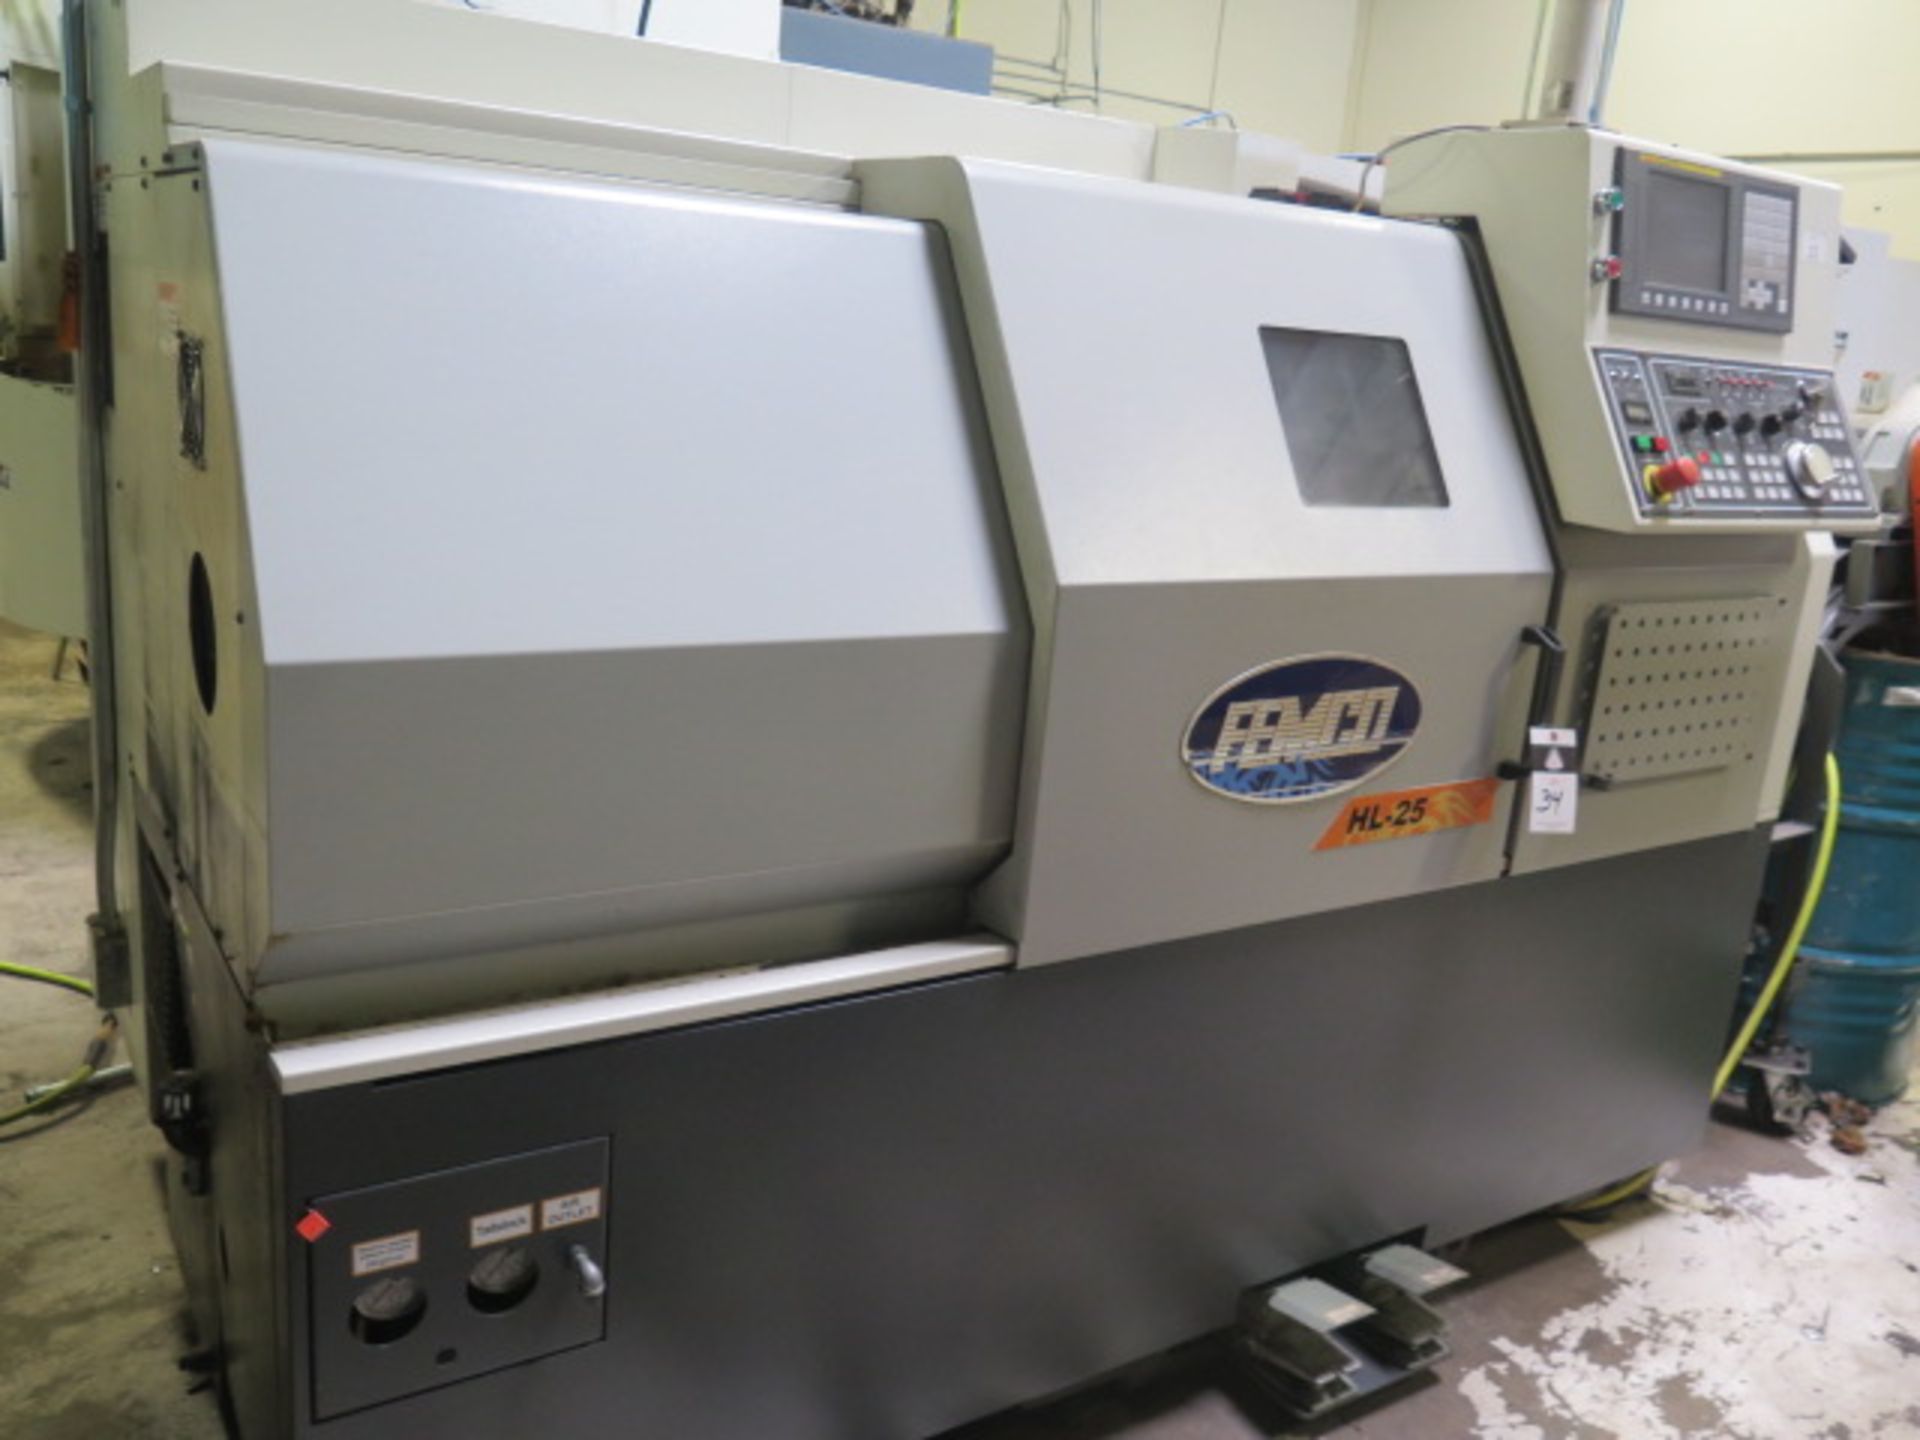 2014 Femco HL-25N CNC Lathe r s/n L114-2104 w/ Fanuc 0i-TD Controls, Tool Presetter, SOLD AS IS - Image 2 of 14